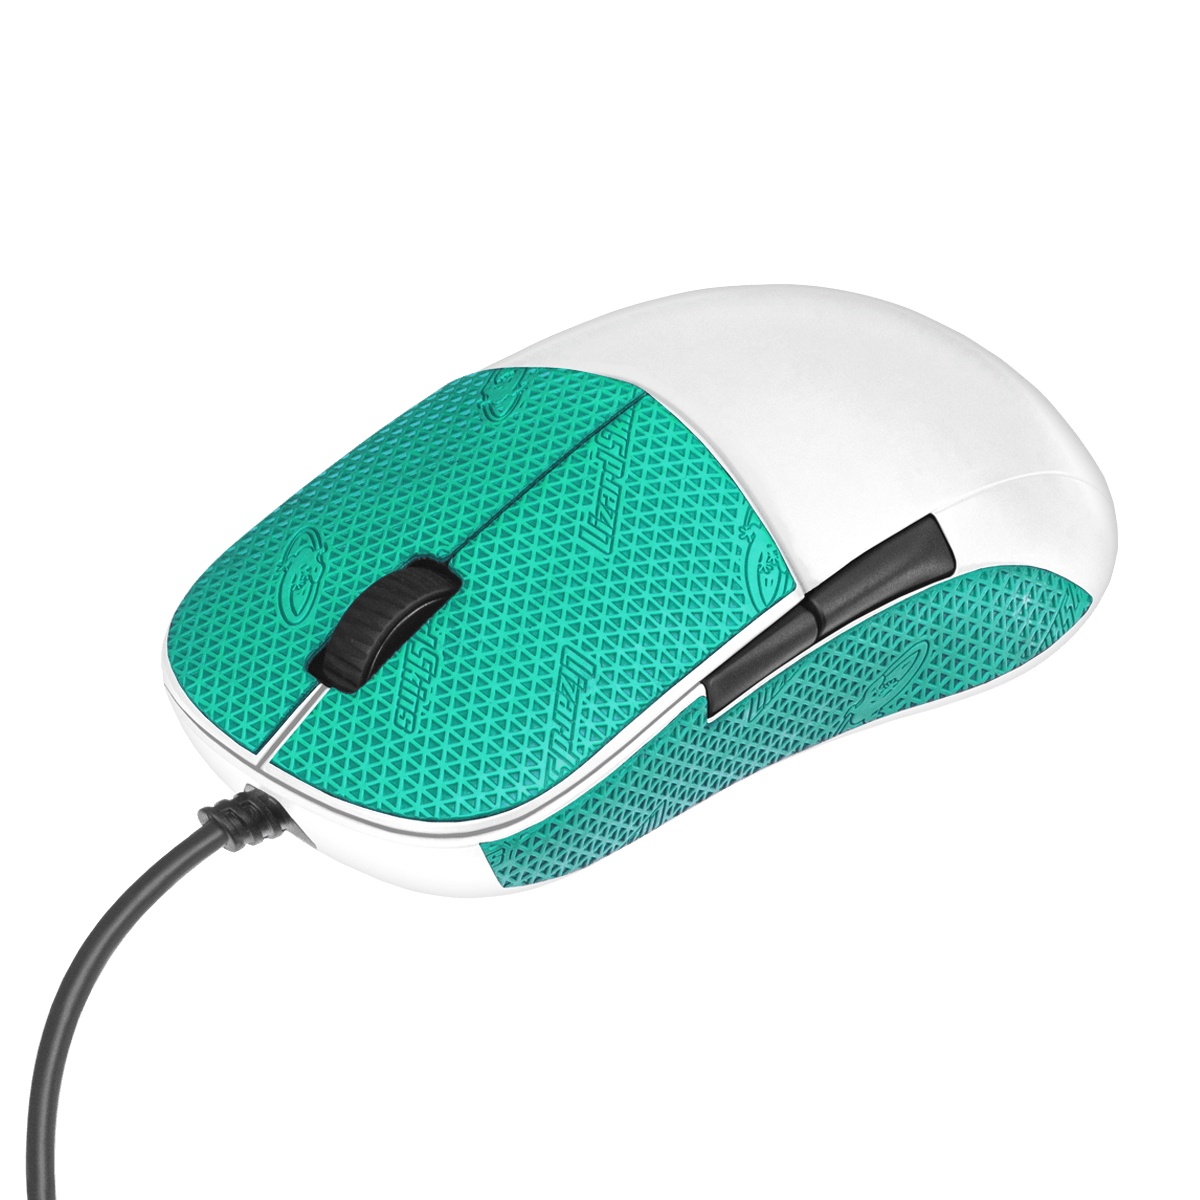 Lizard Skins Grip DSP Mouse teal